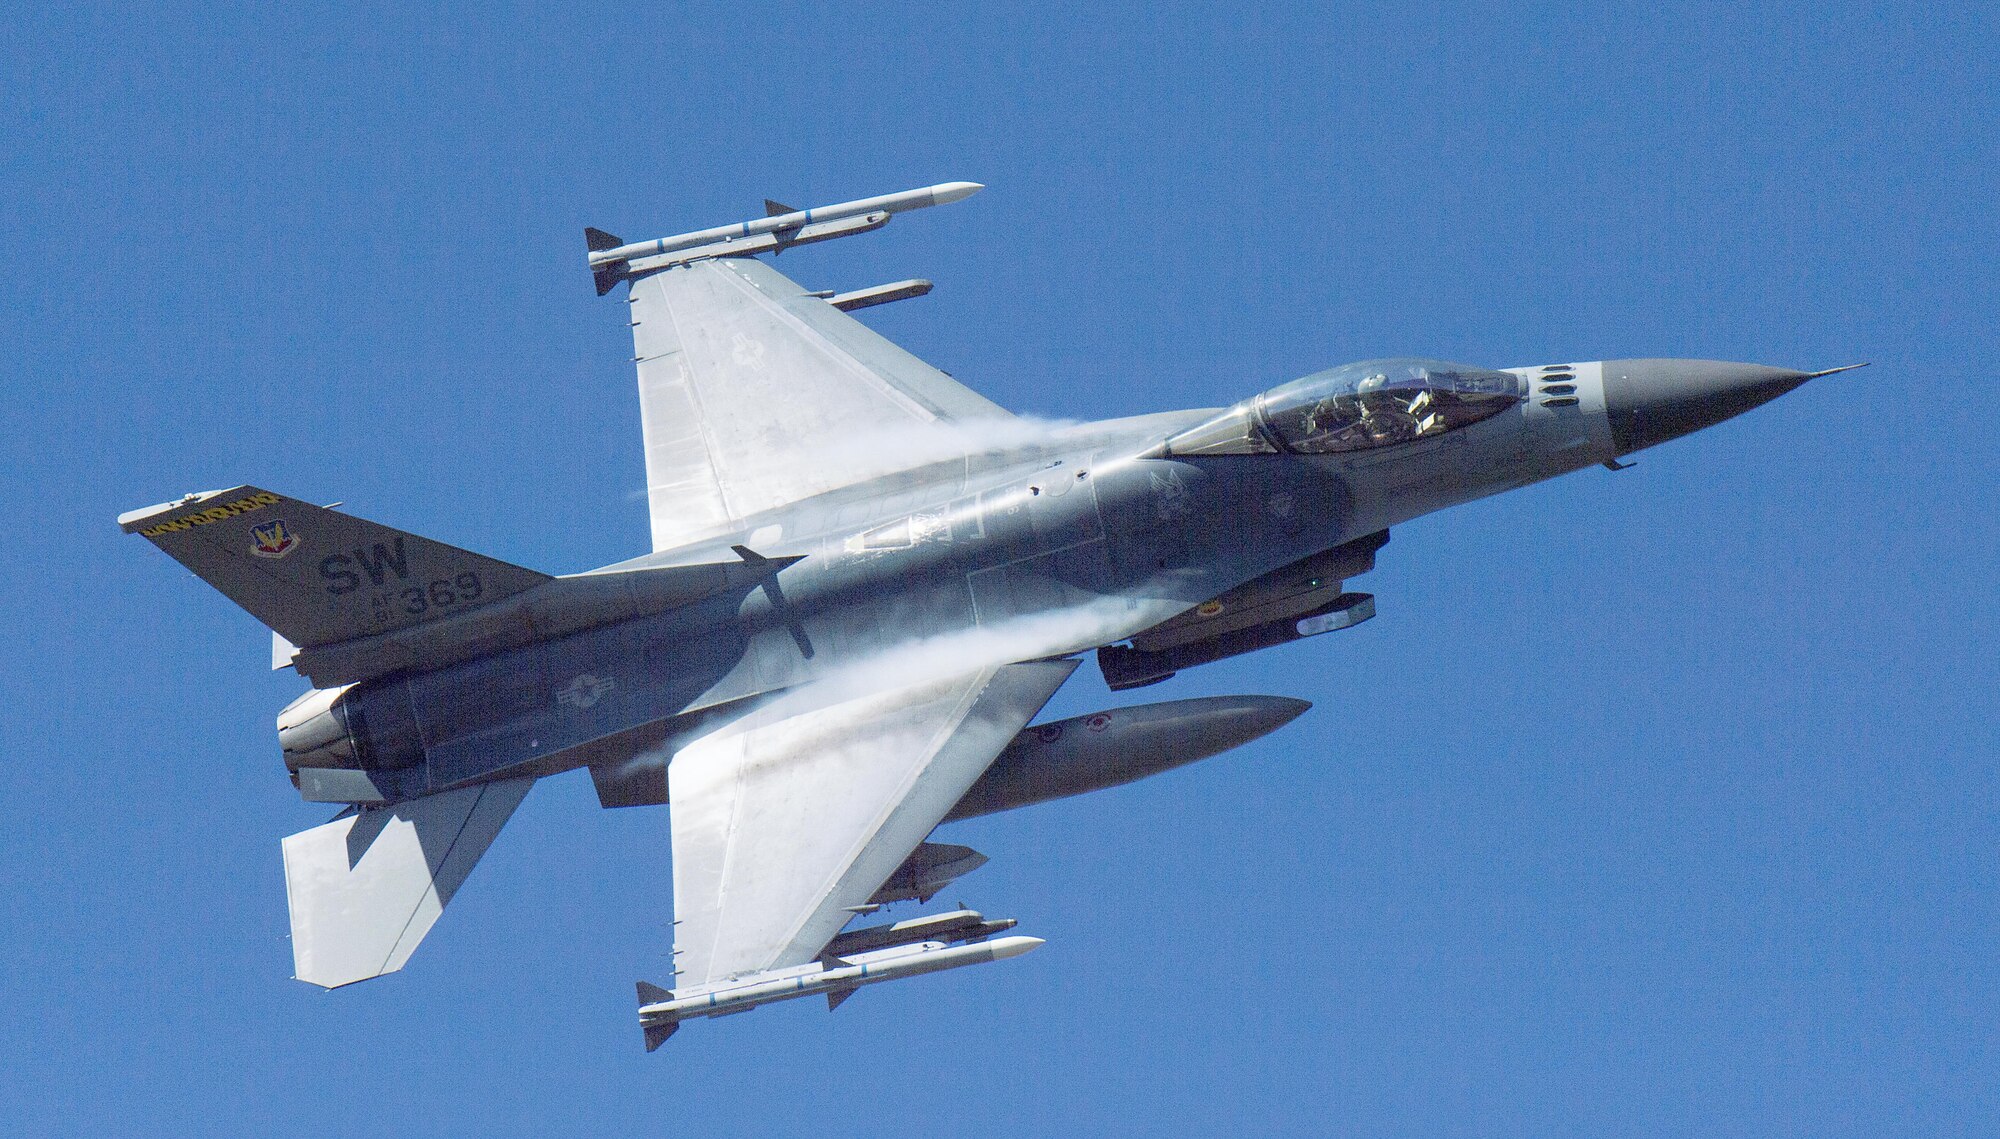 An F-16 Fighting Falcon flies over Grand Bay Bombing and Gunnery Range at Moody Air Force Base, Ga., Feb. 18, 2016. Multiple U.S. Air Force aircraft within Air Combat Command conducted joint aerial training that showcased the aircrafts tactical air and ground maneuvers, as well as its weapons capabilities. (U.S. Air Force photo by Staff Sgt. Brian J. Valencia/Released)